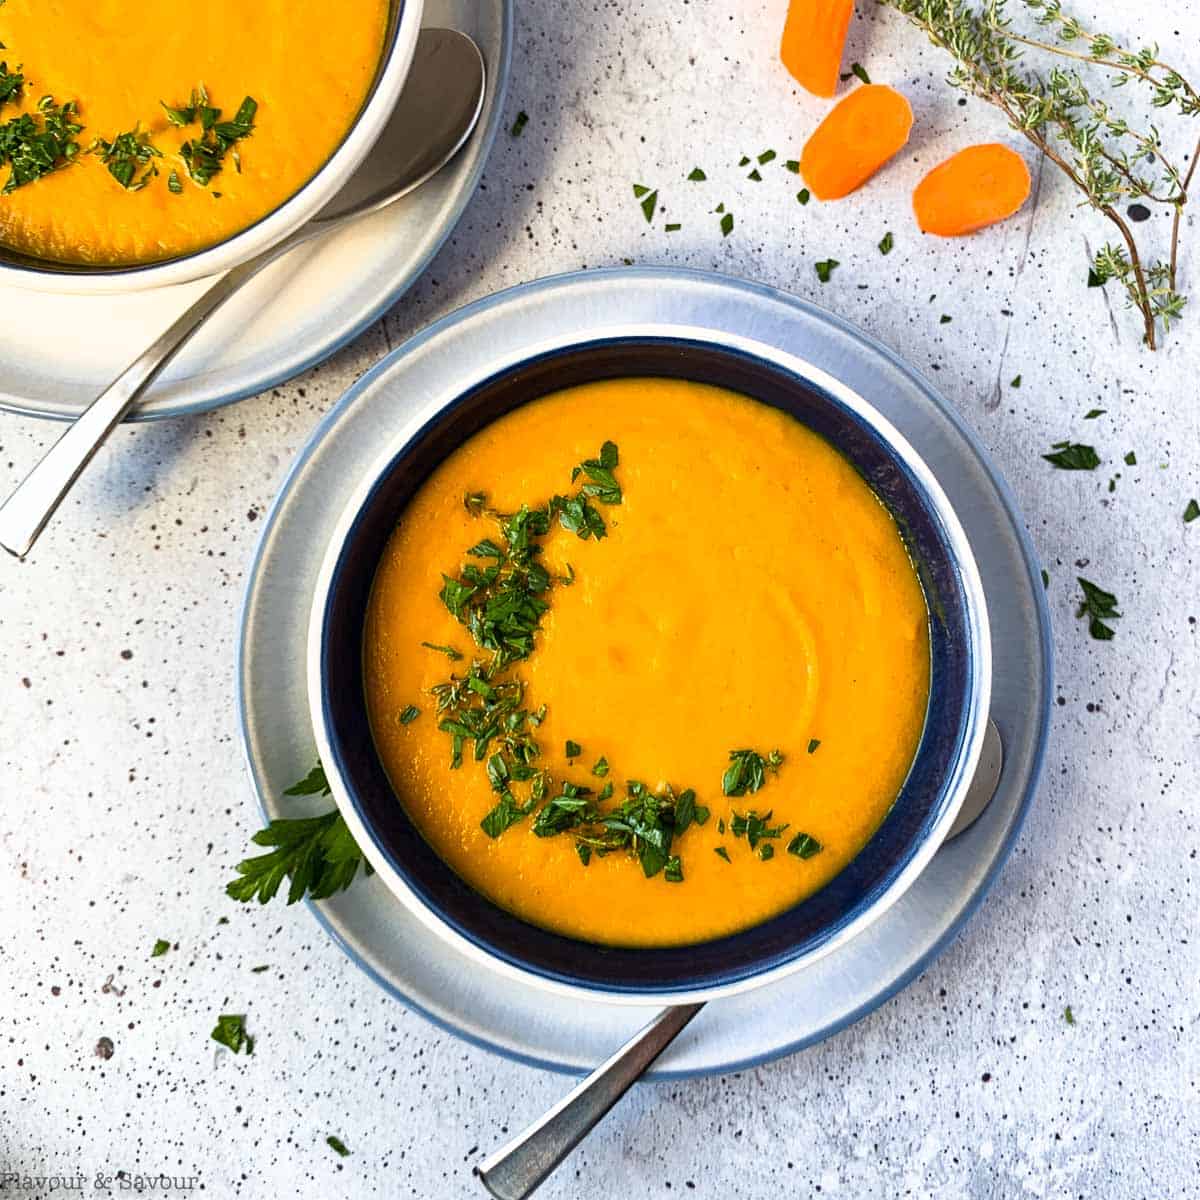 Easy Roasted Carrot Ginger Soup Recipe - Vegan - Flavour and Savour